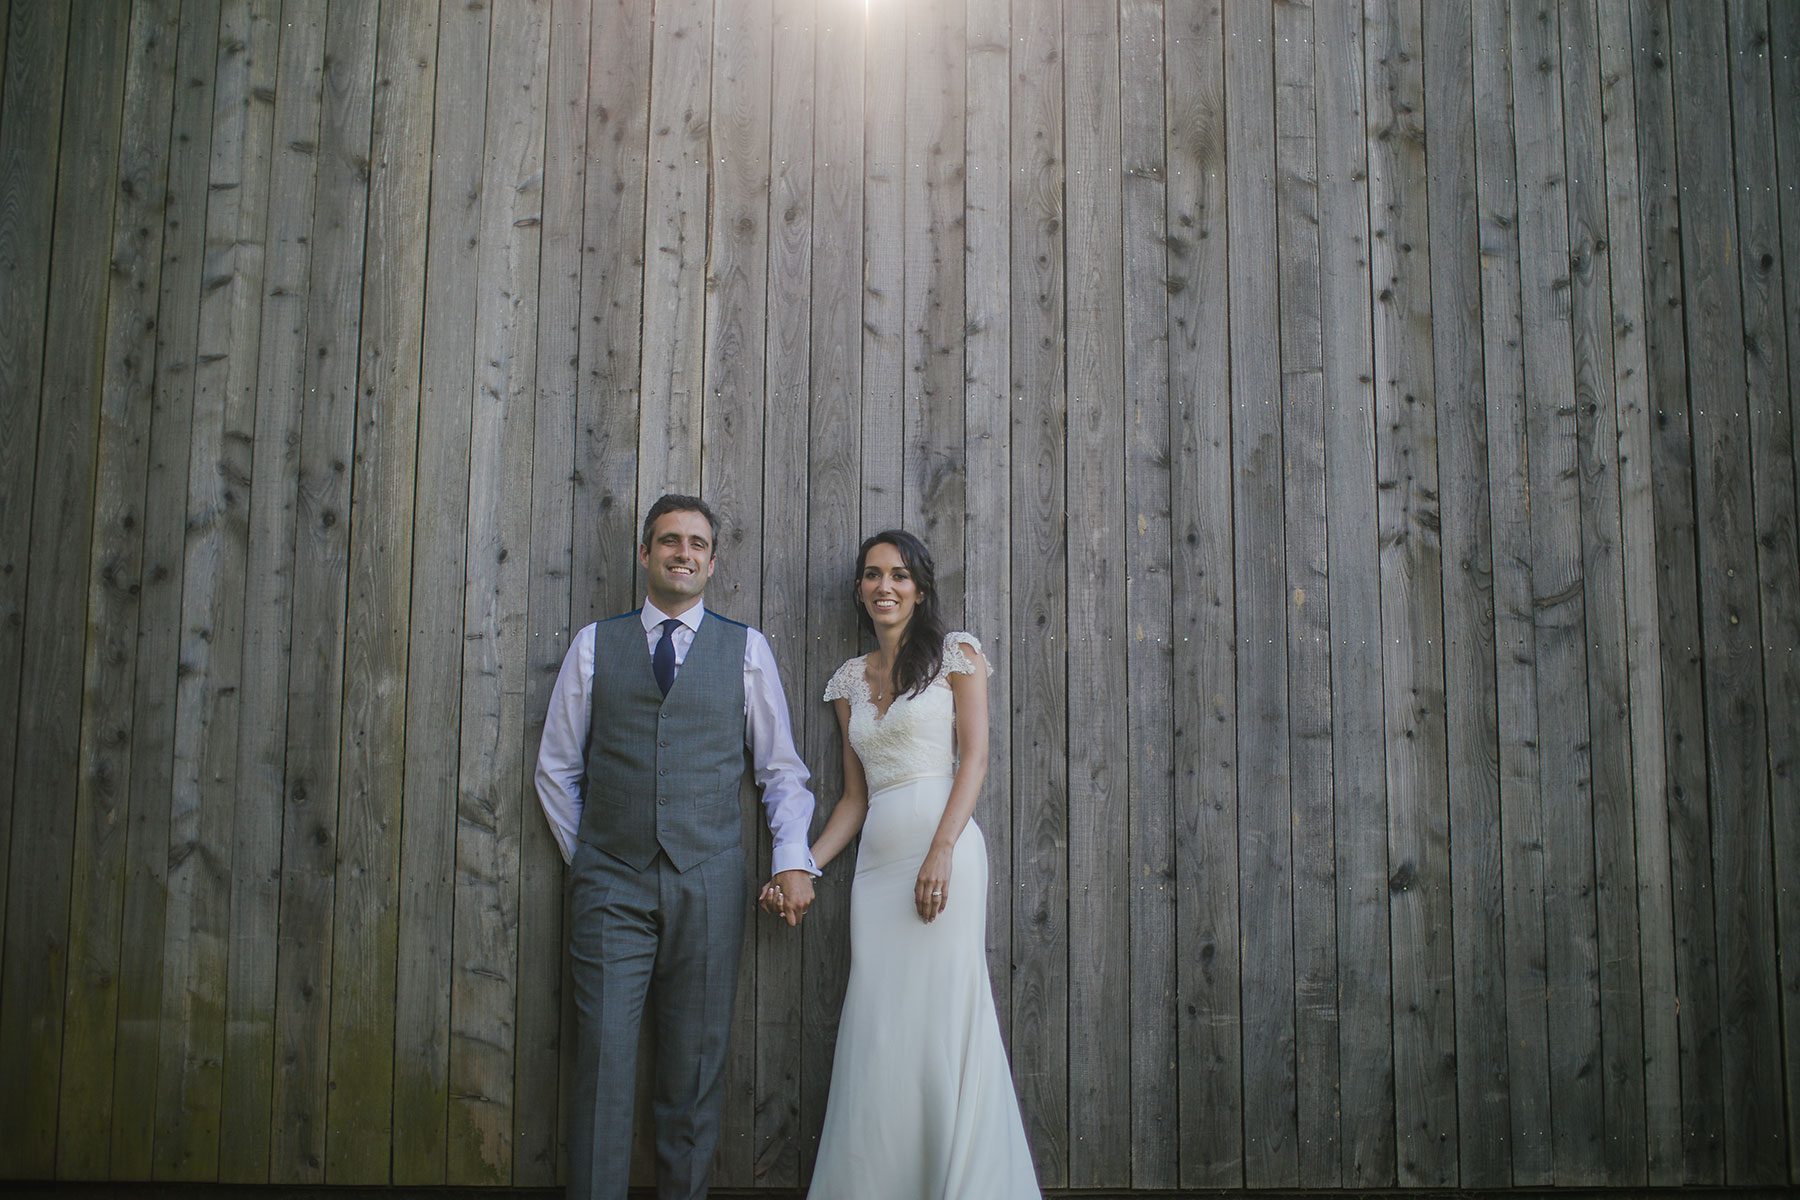 Wooden Wall - Reportage Wedding Photography in Cheltenham | Bullit Photography